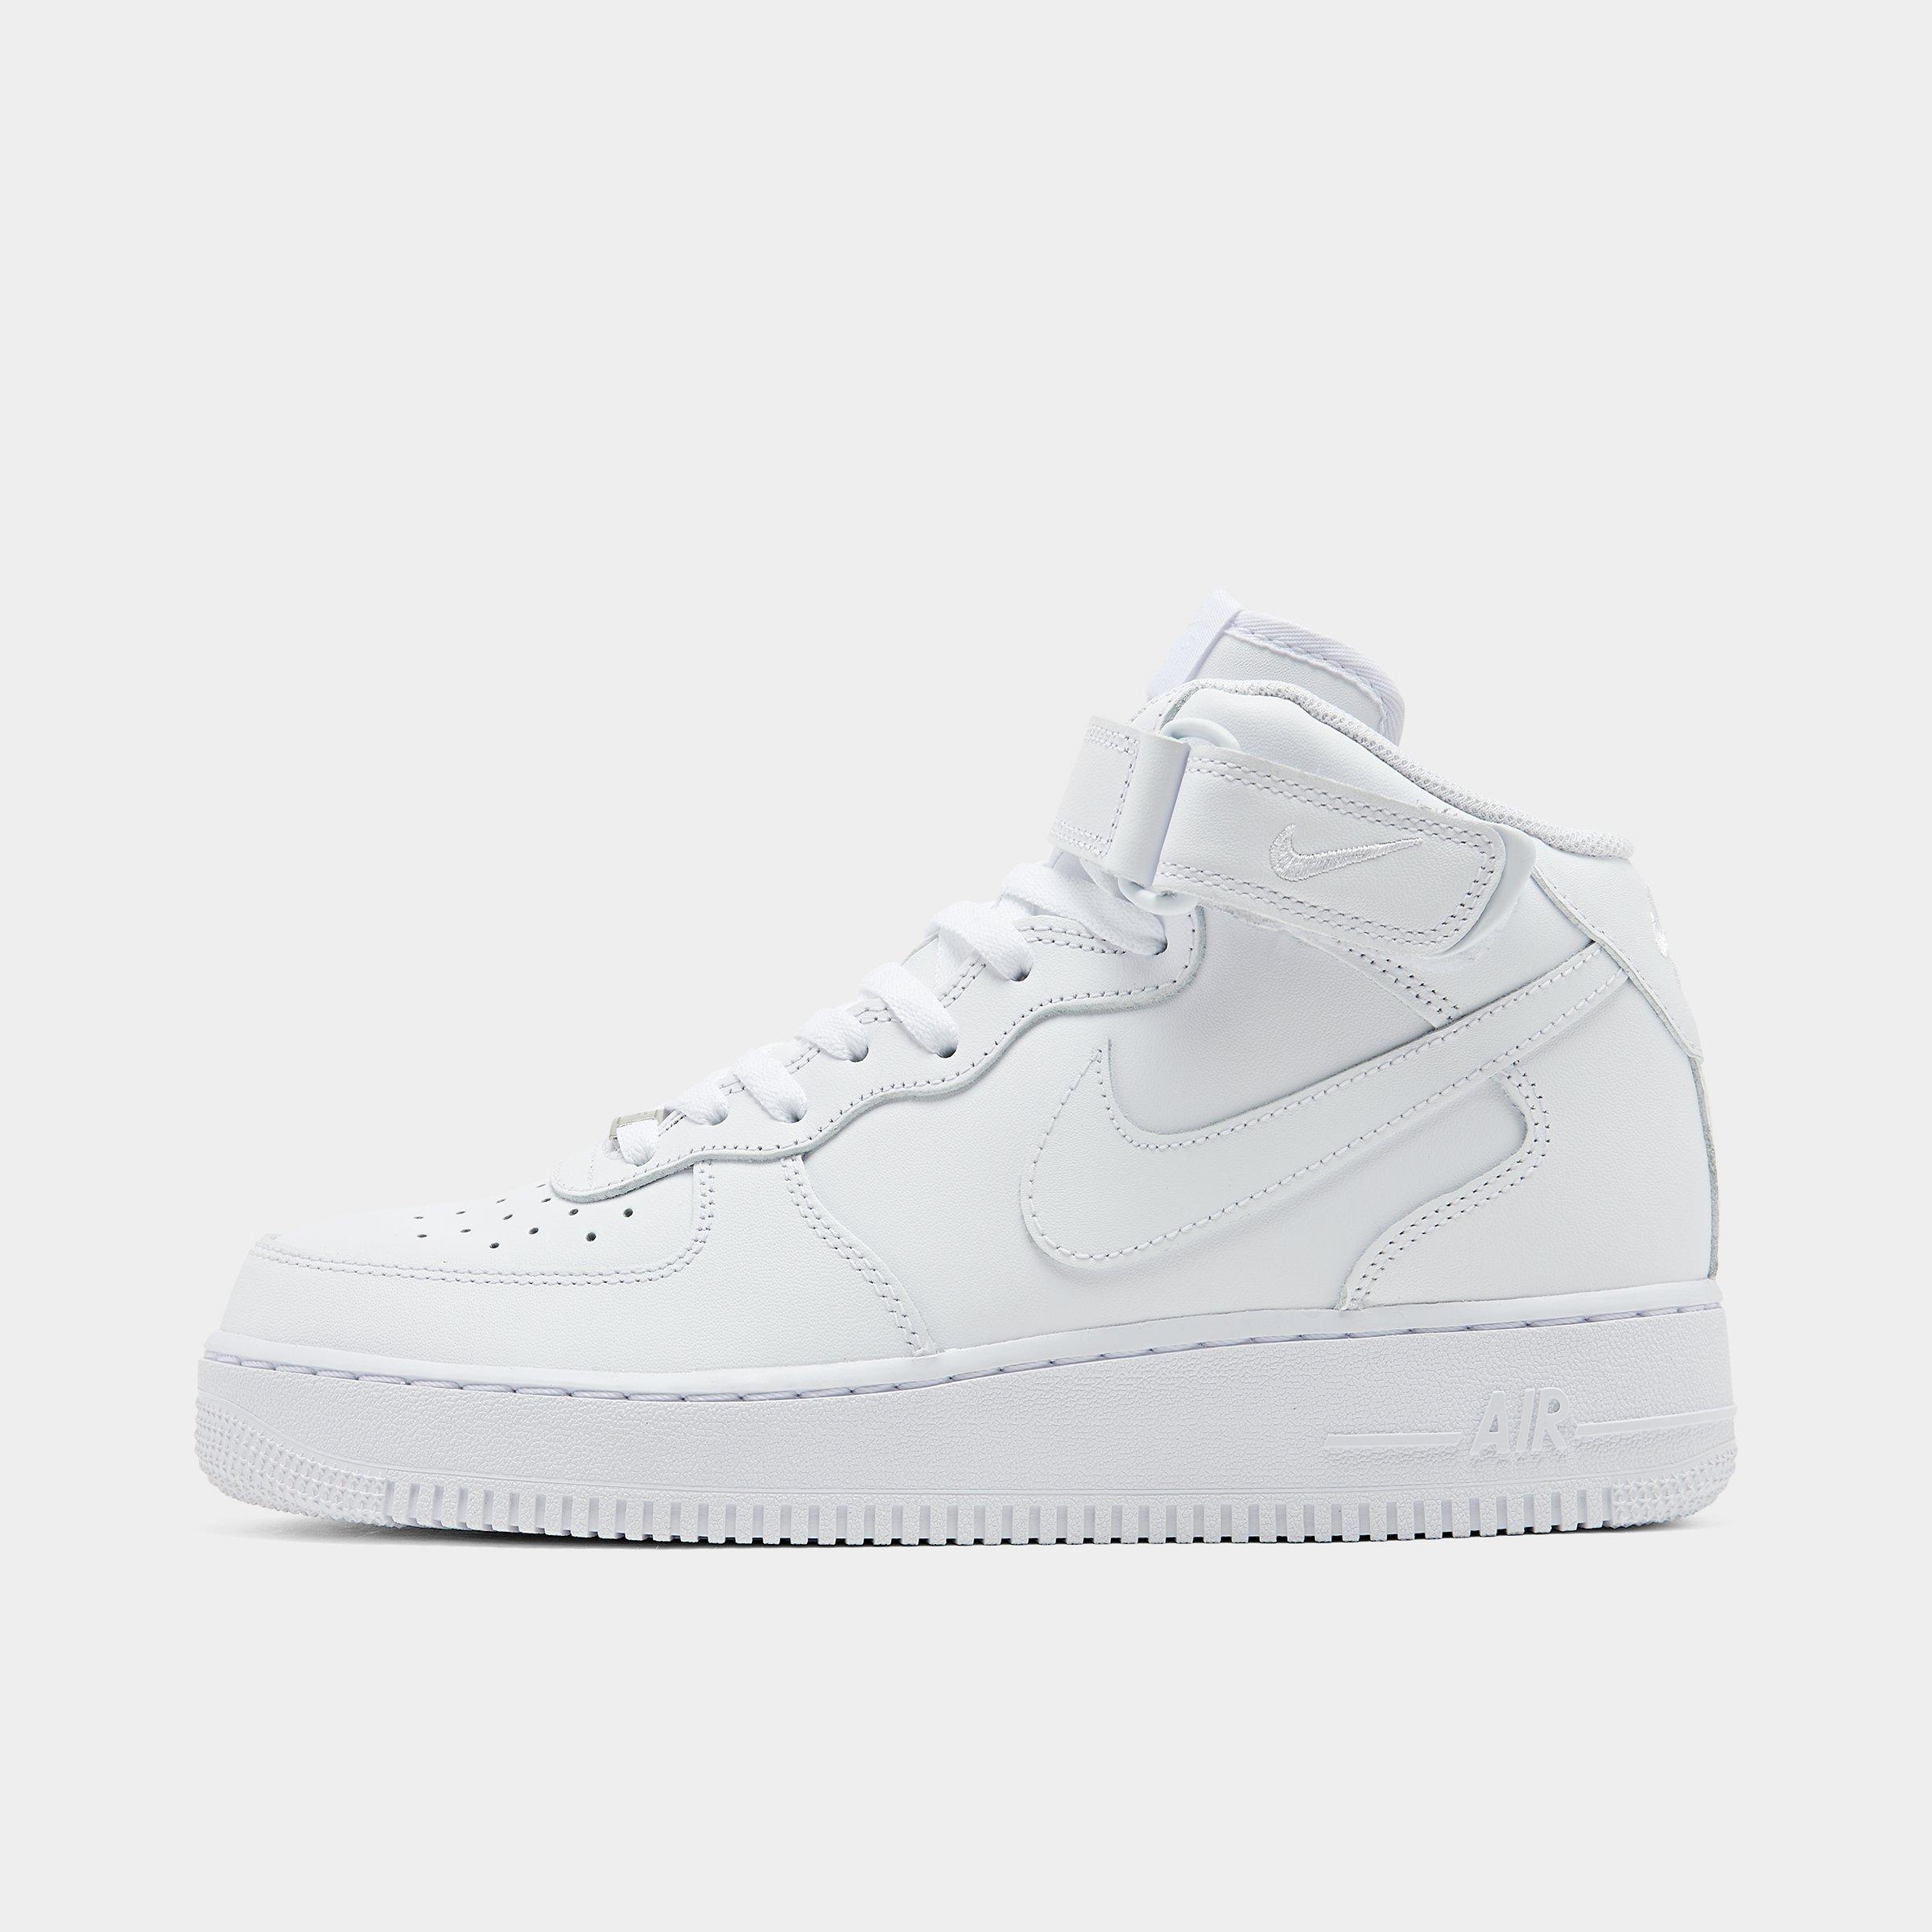 finish line nike air force